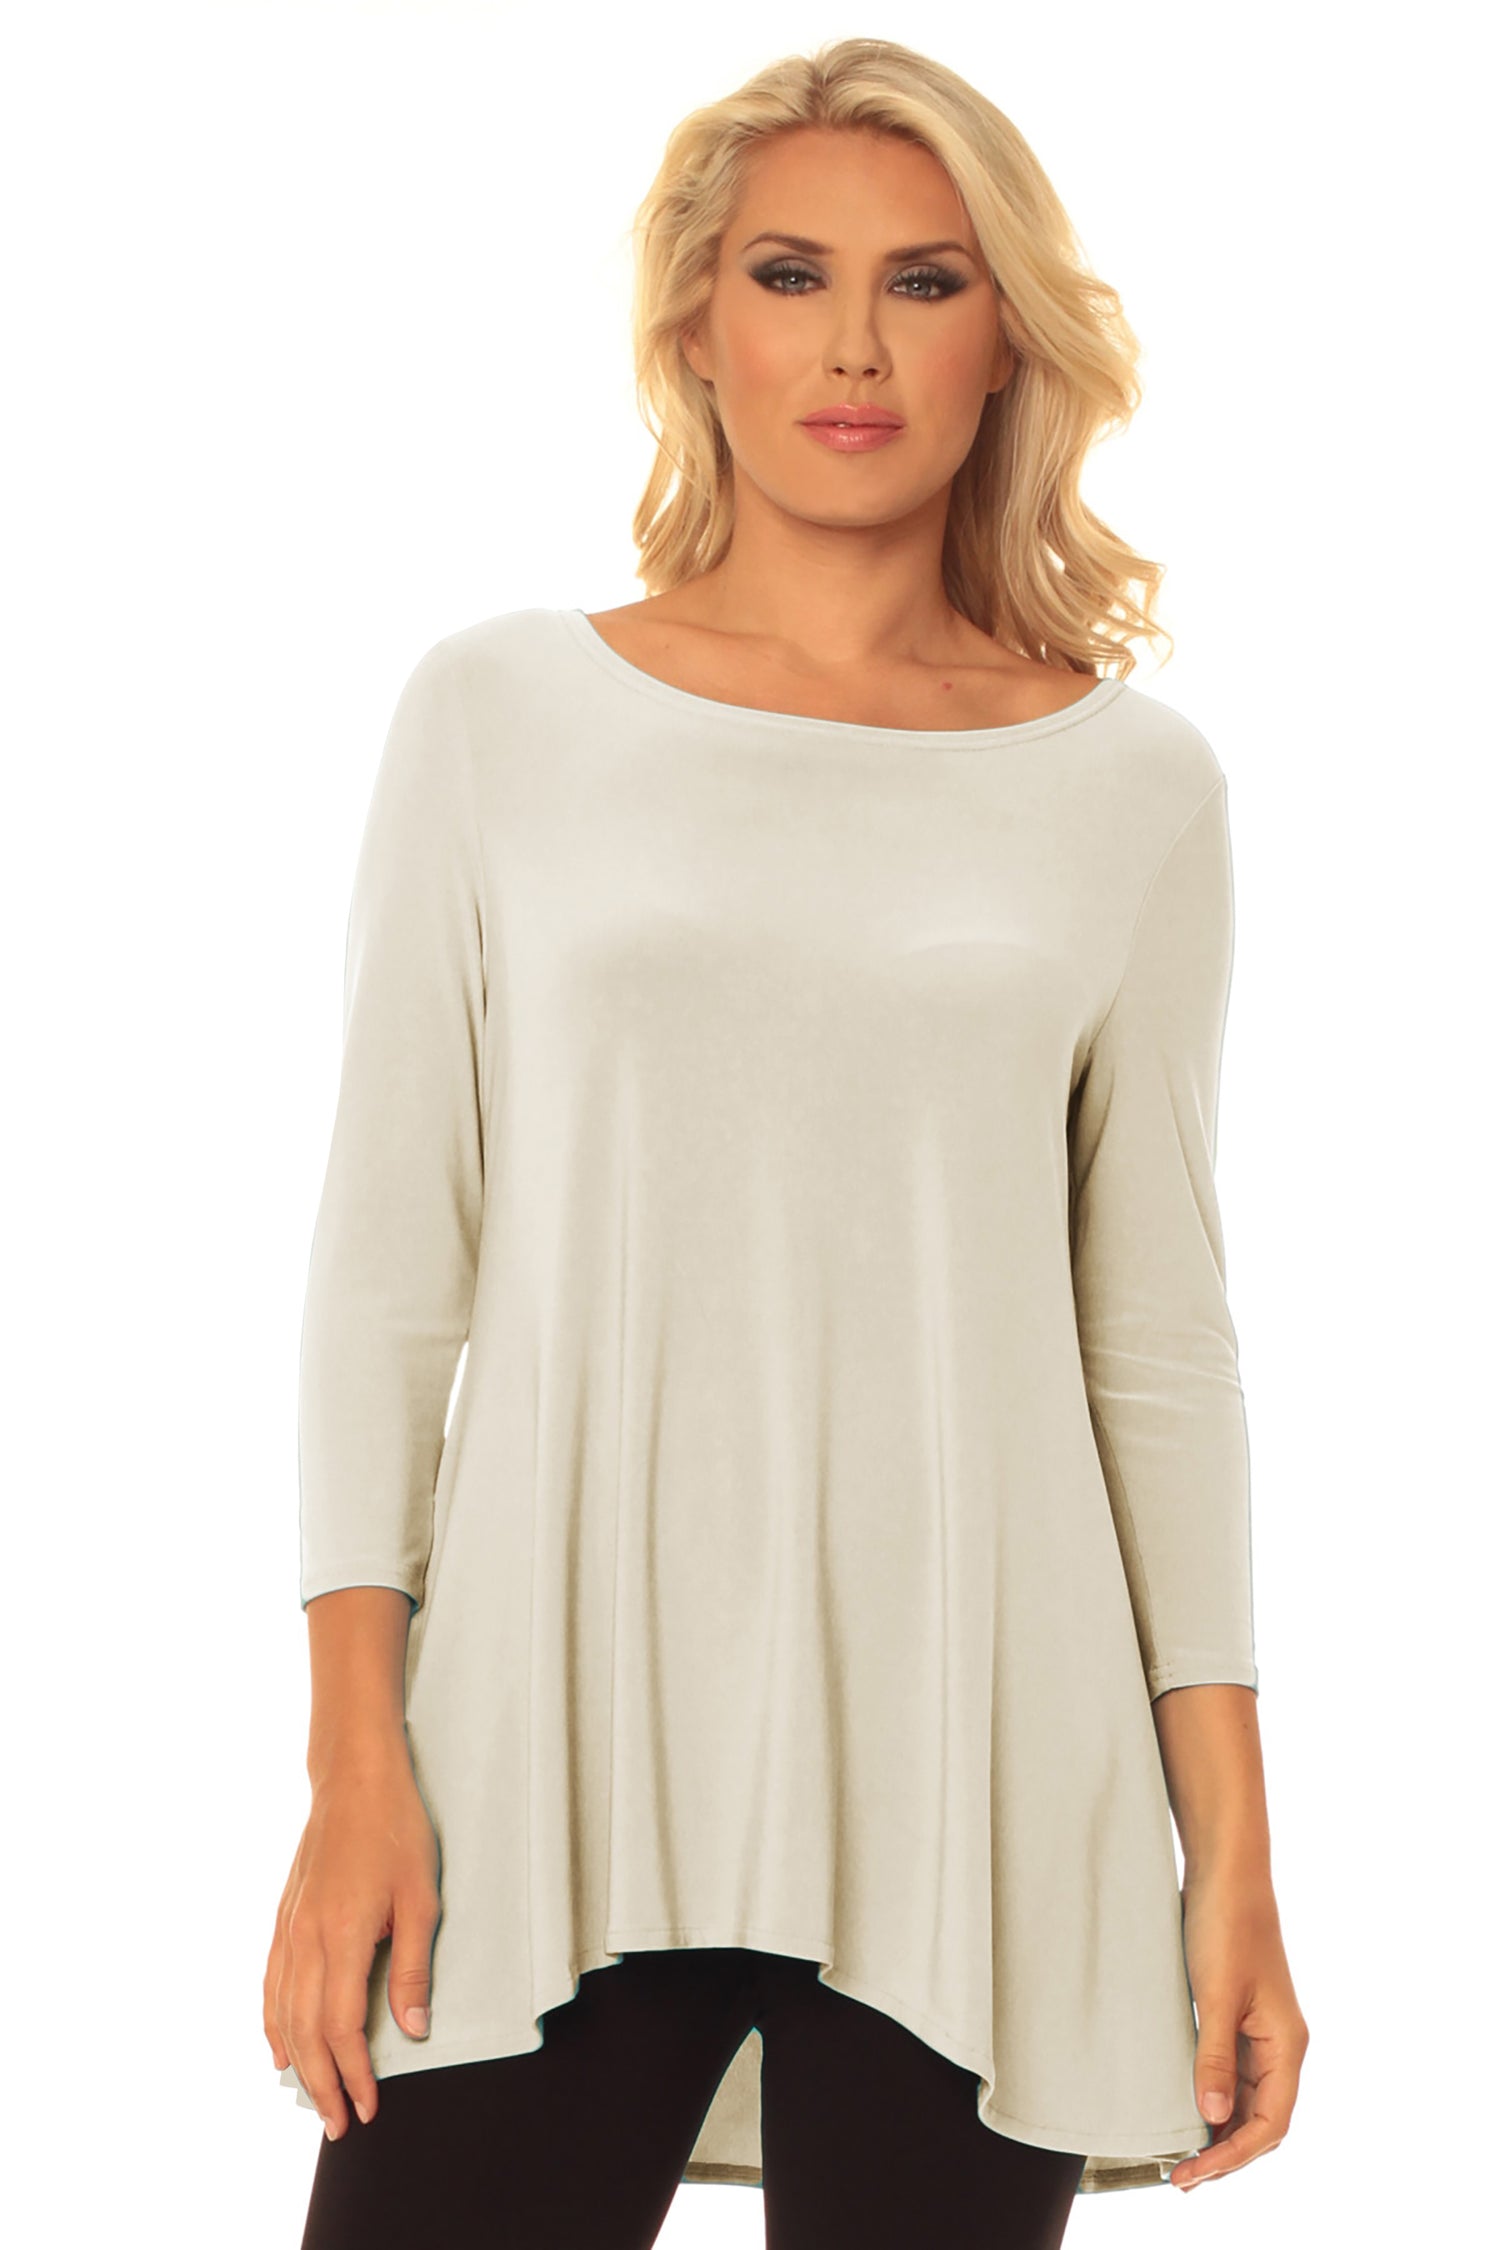 Women's High Low Tunic For Leggings - Neutral Colors